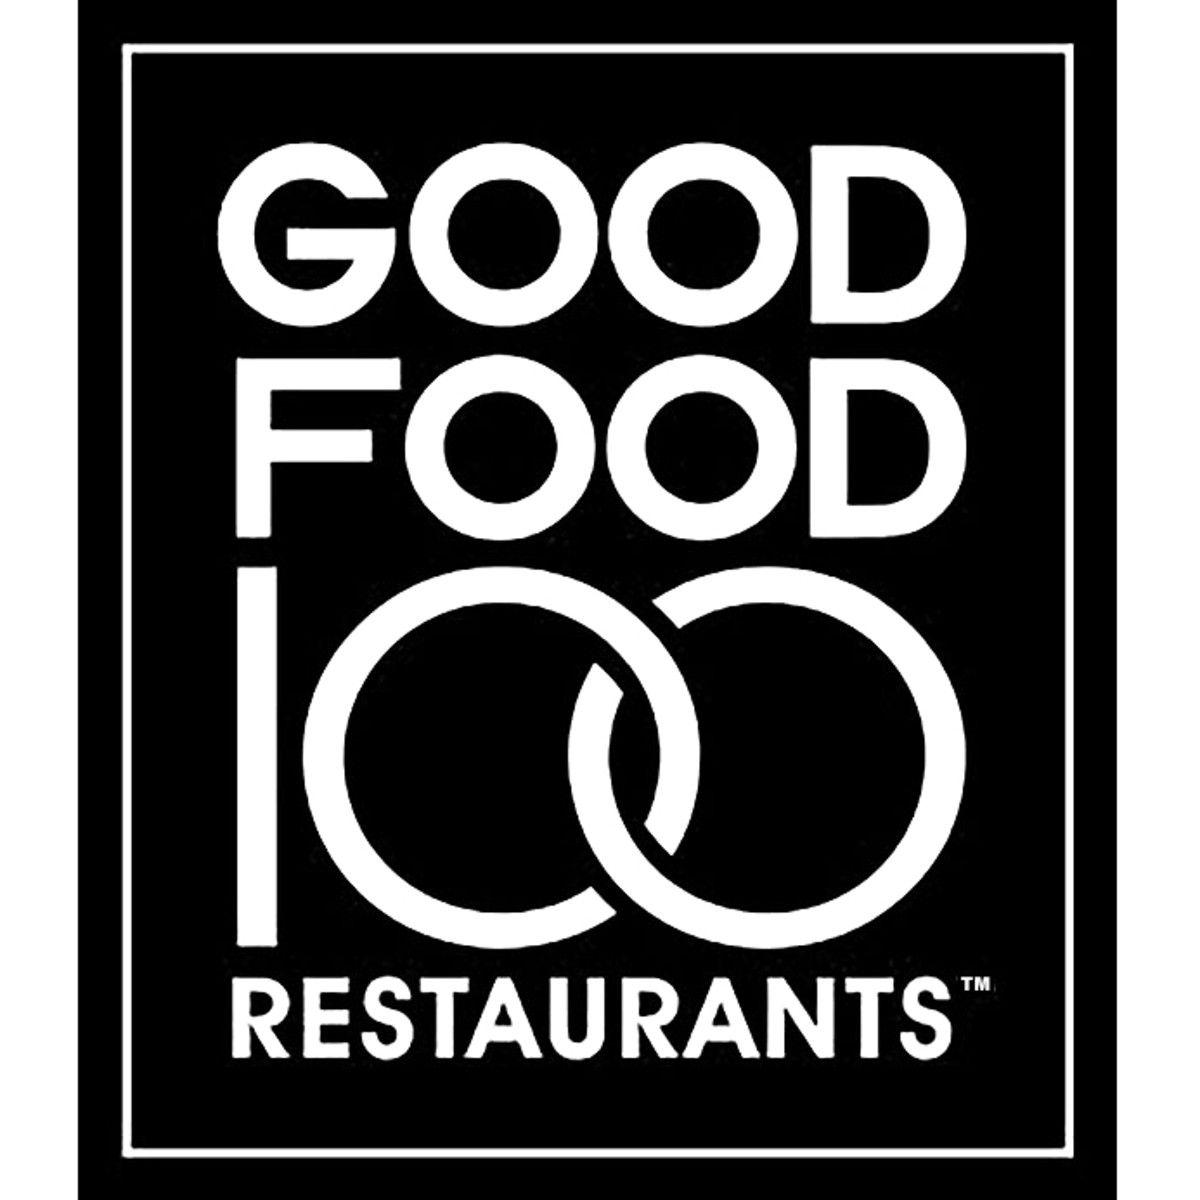 Black and White Restaurant Rectangle Logo - How To Find Local Sustainable Restaurants - Rachael Ray Every Day